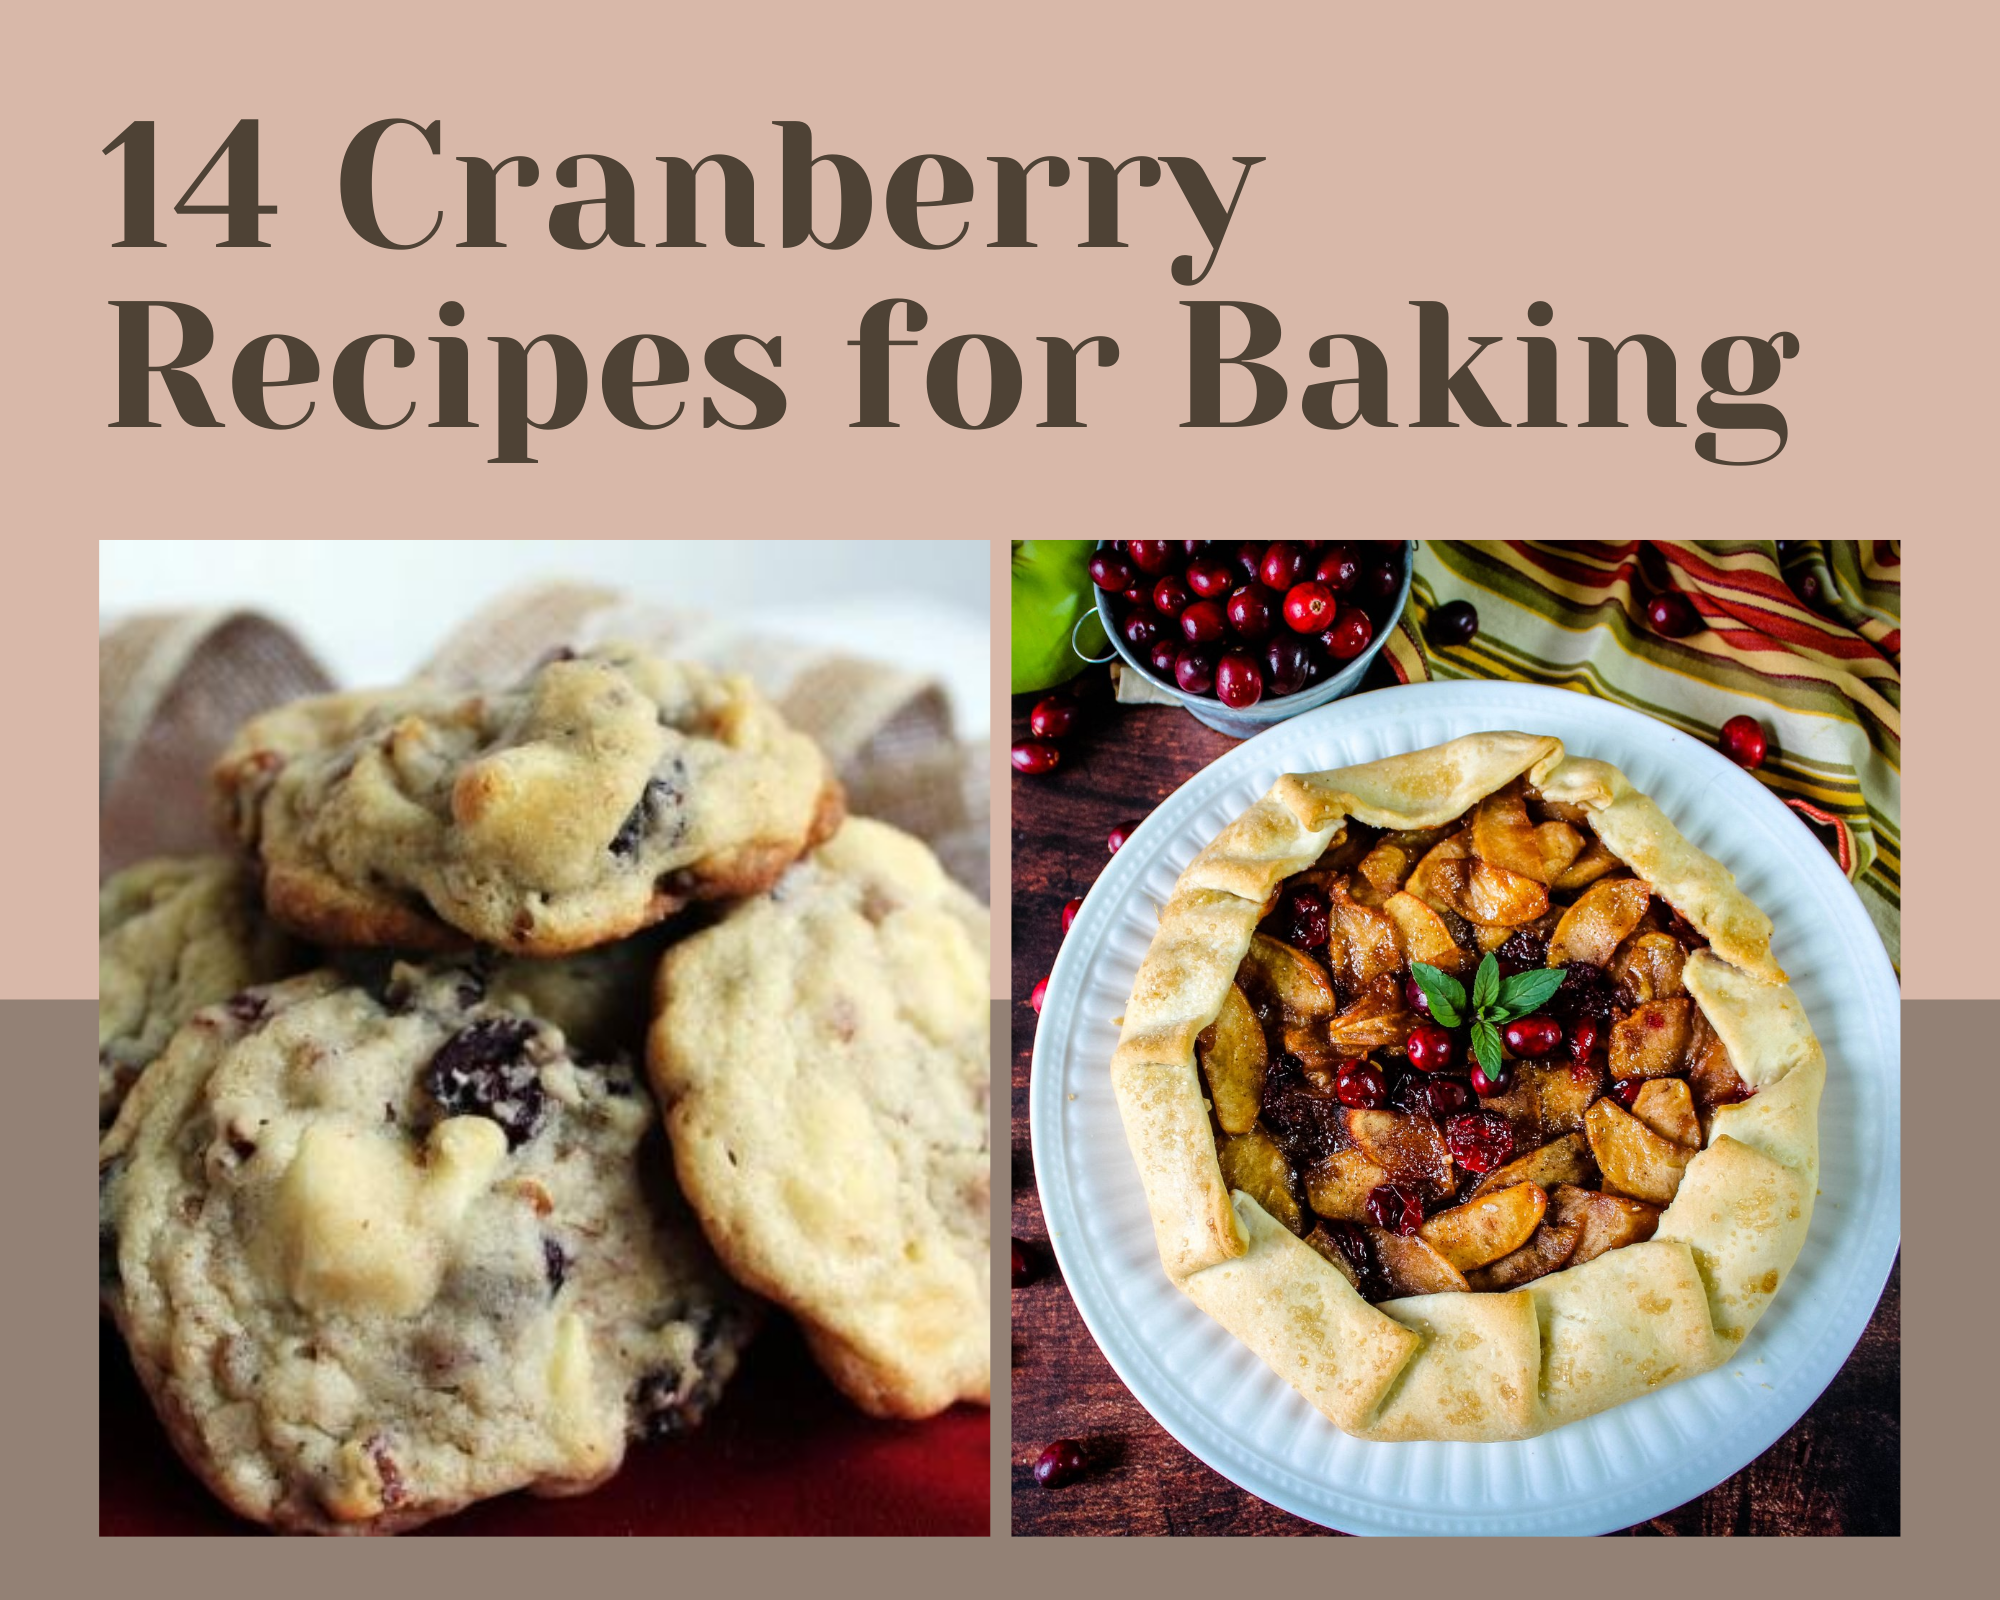 cranberry cookies and more baked goods